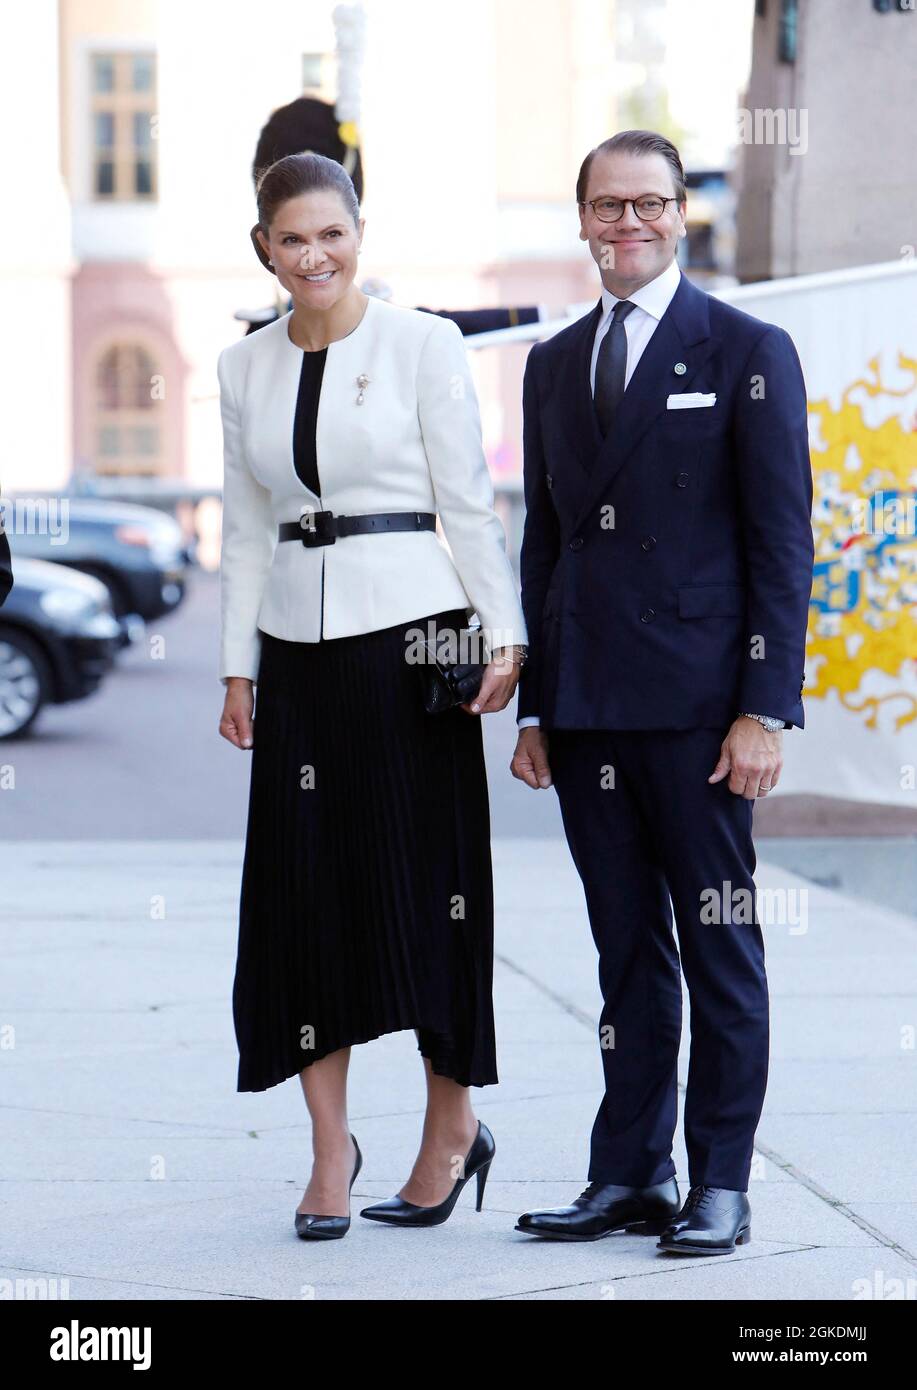 Stockholm, Sweden. September 14, 2021, Kronprinsessan Victoria, Prins Daniel, Crown Princess Victoria, prince Daniel, attending a ceremony in connection with opening of the Swedish Parliament for the 2021/22 work year at the Swedish Parliament House on September 14, 2021 in Stockholm, Sweden. Photo by Patrik C Osterberg/Stella Pictures/ABACAPRESS.COM Stock Photo